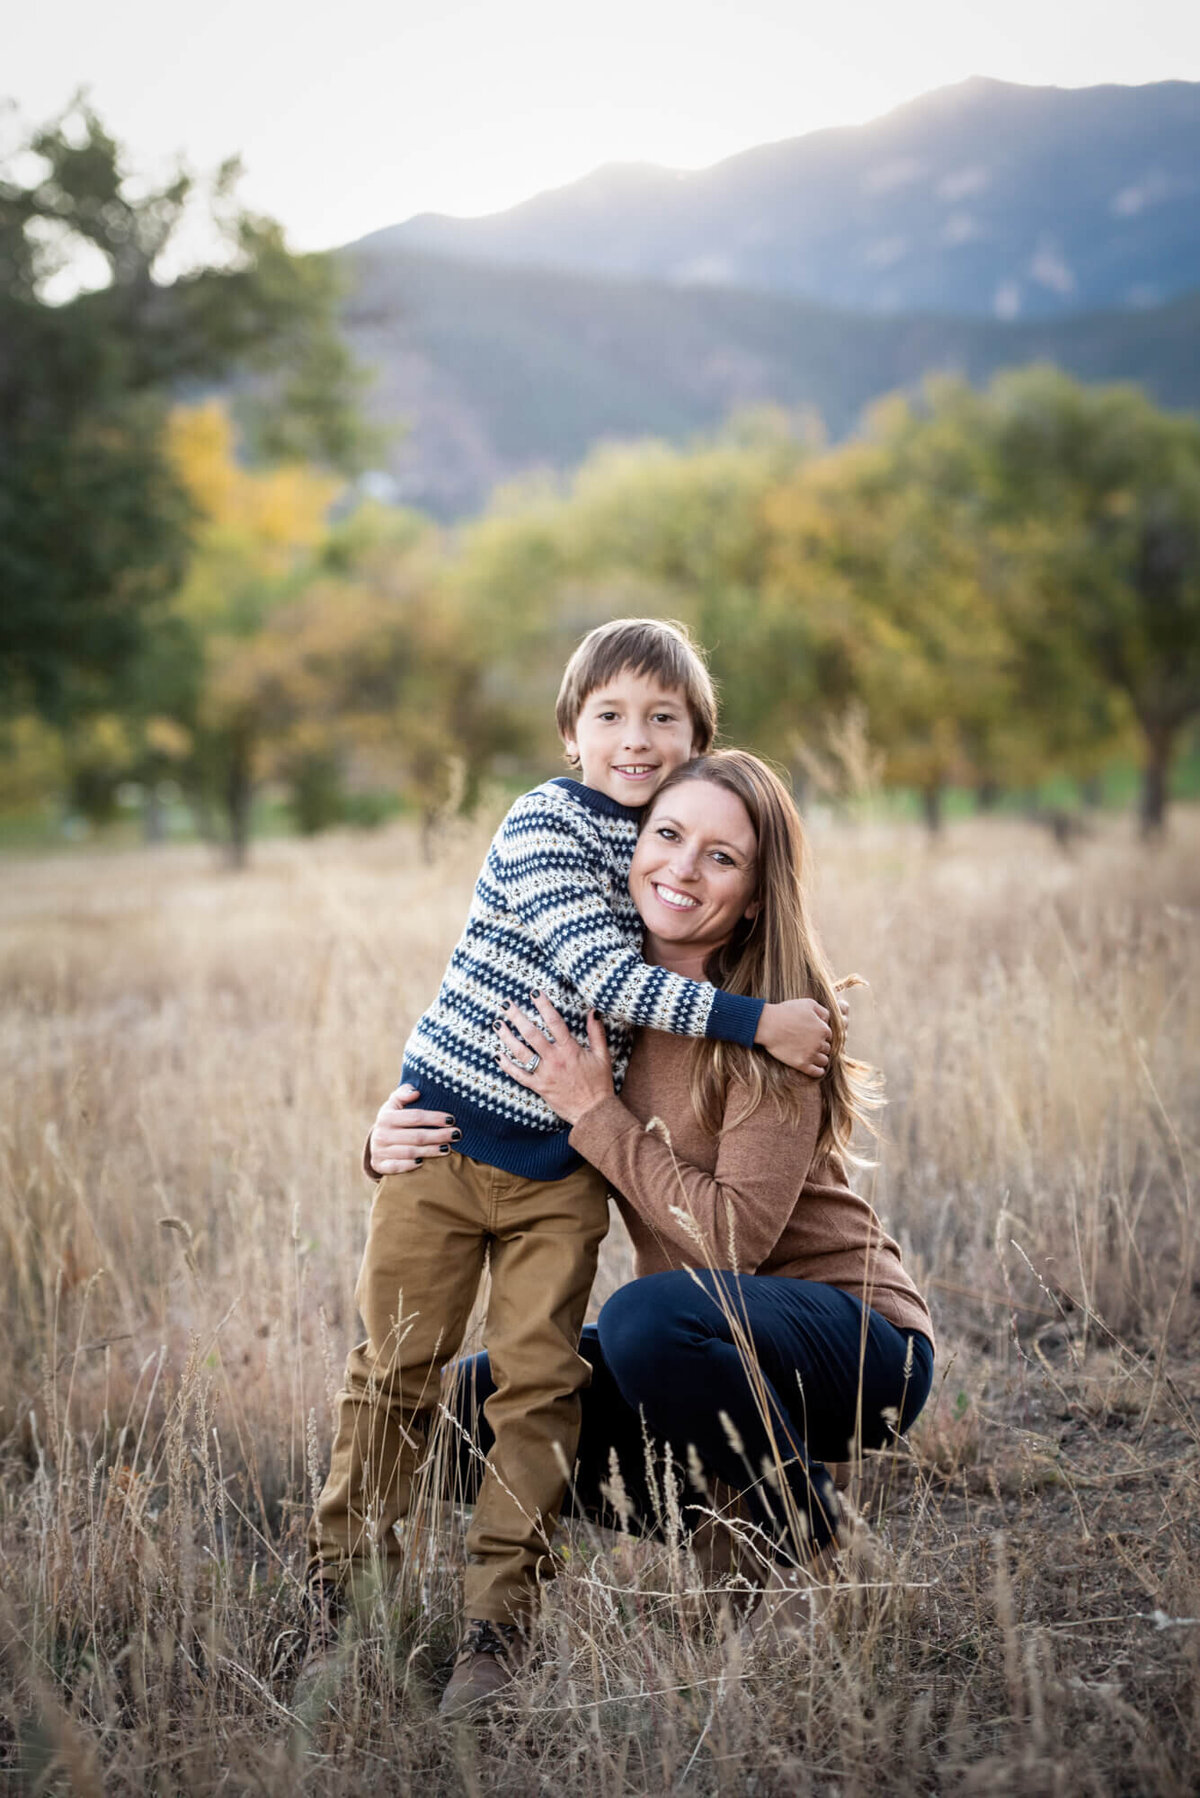 A mother in a brown shirt hugs her young son in a field at sunset